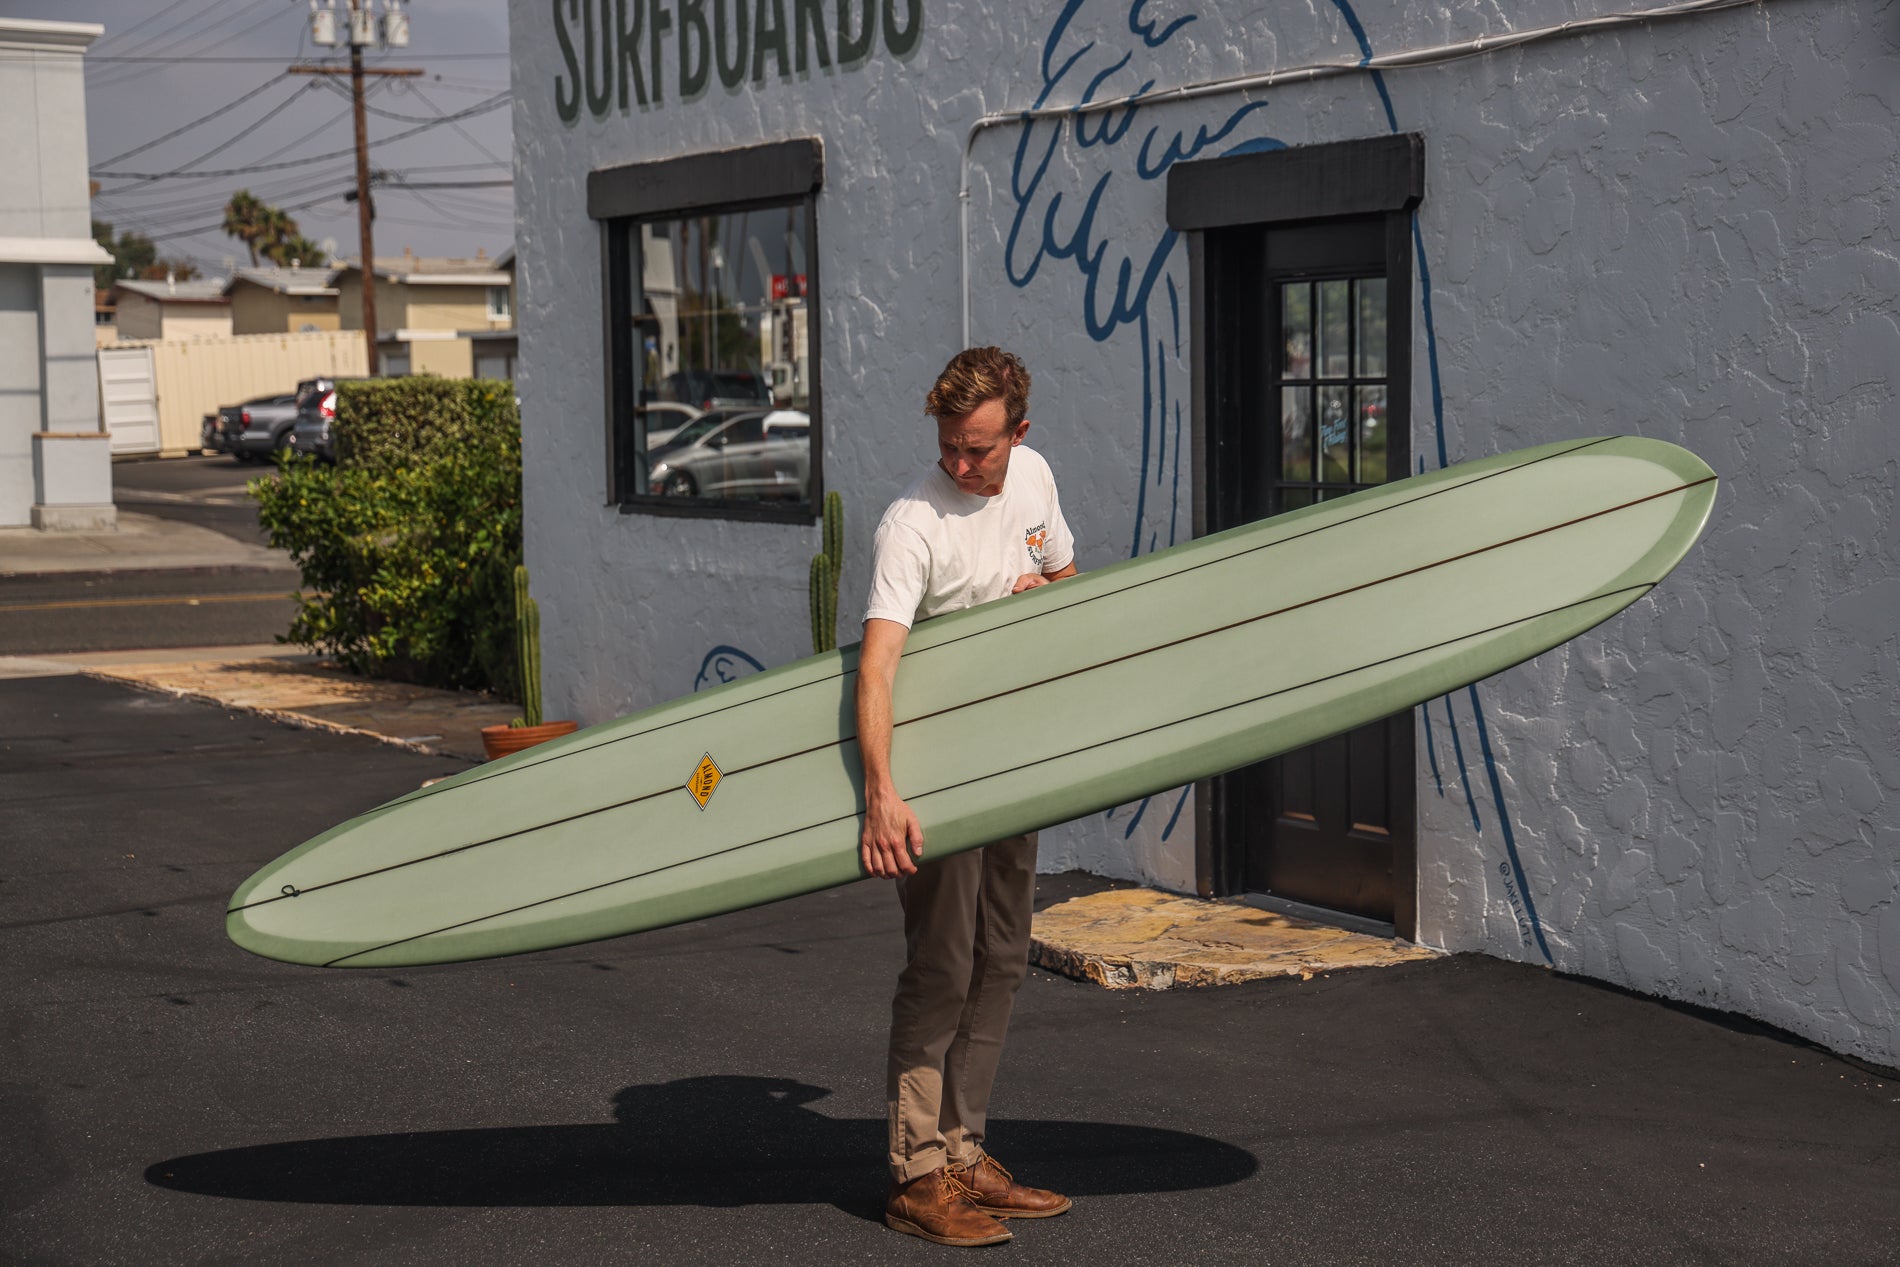 You Just Picked Up Your New Surfboard...